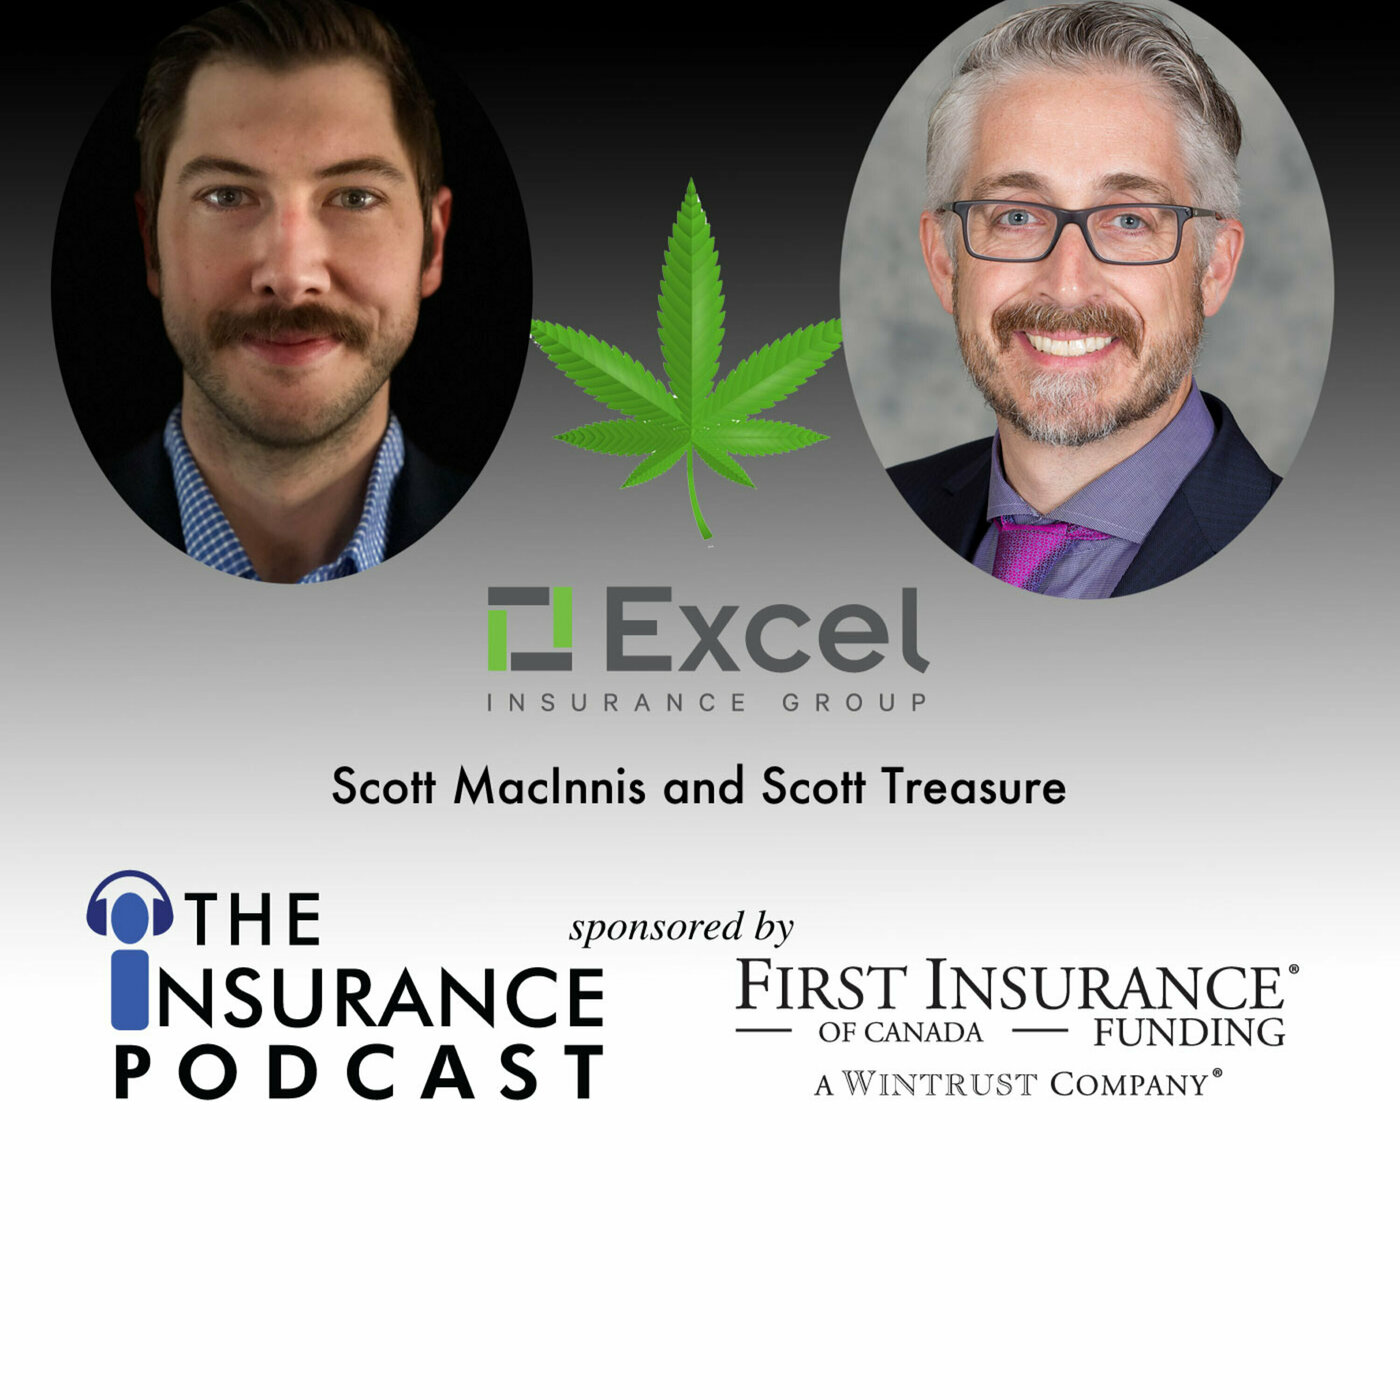 Insuring Cannabis with Excel Insurance Group Image